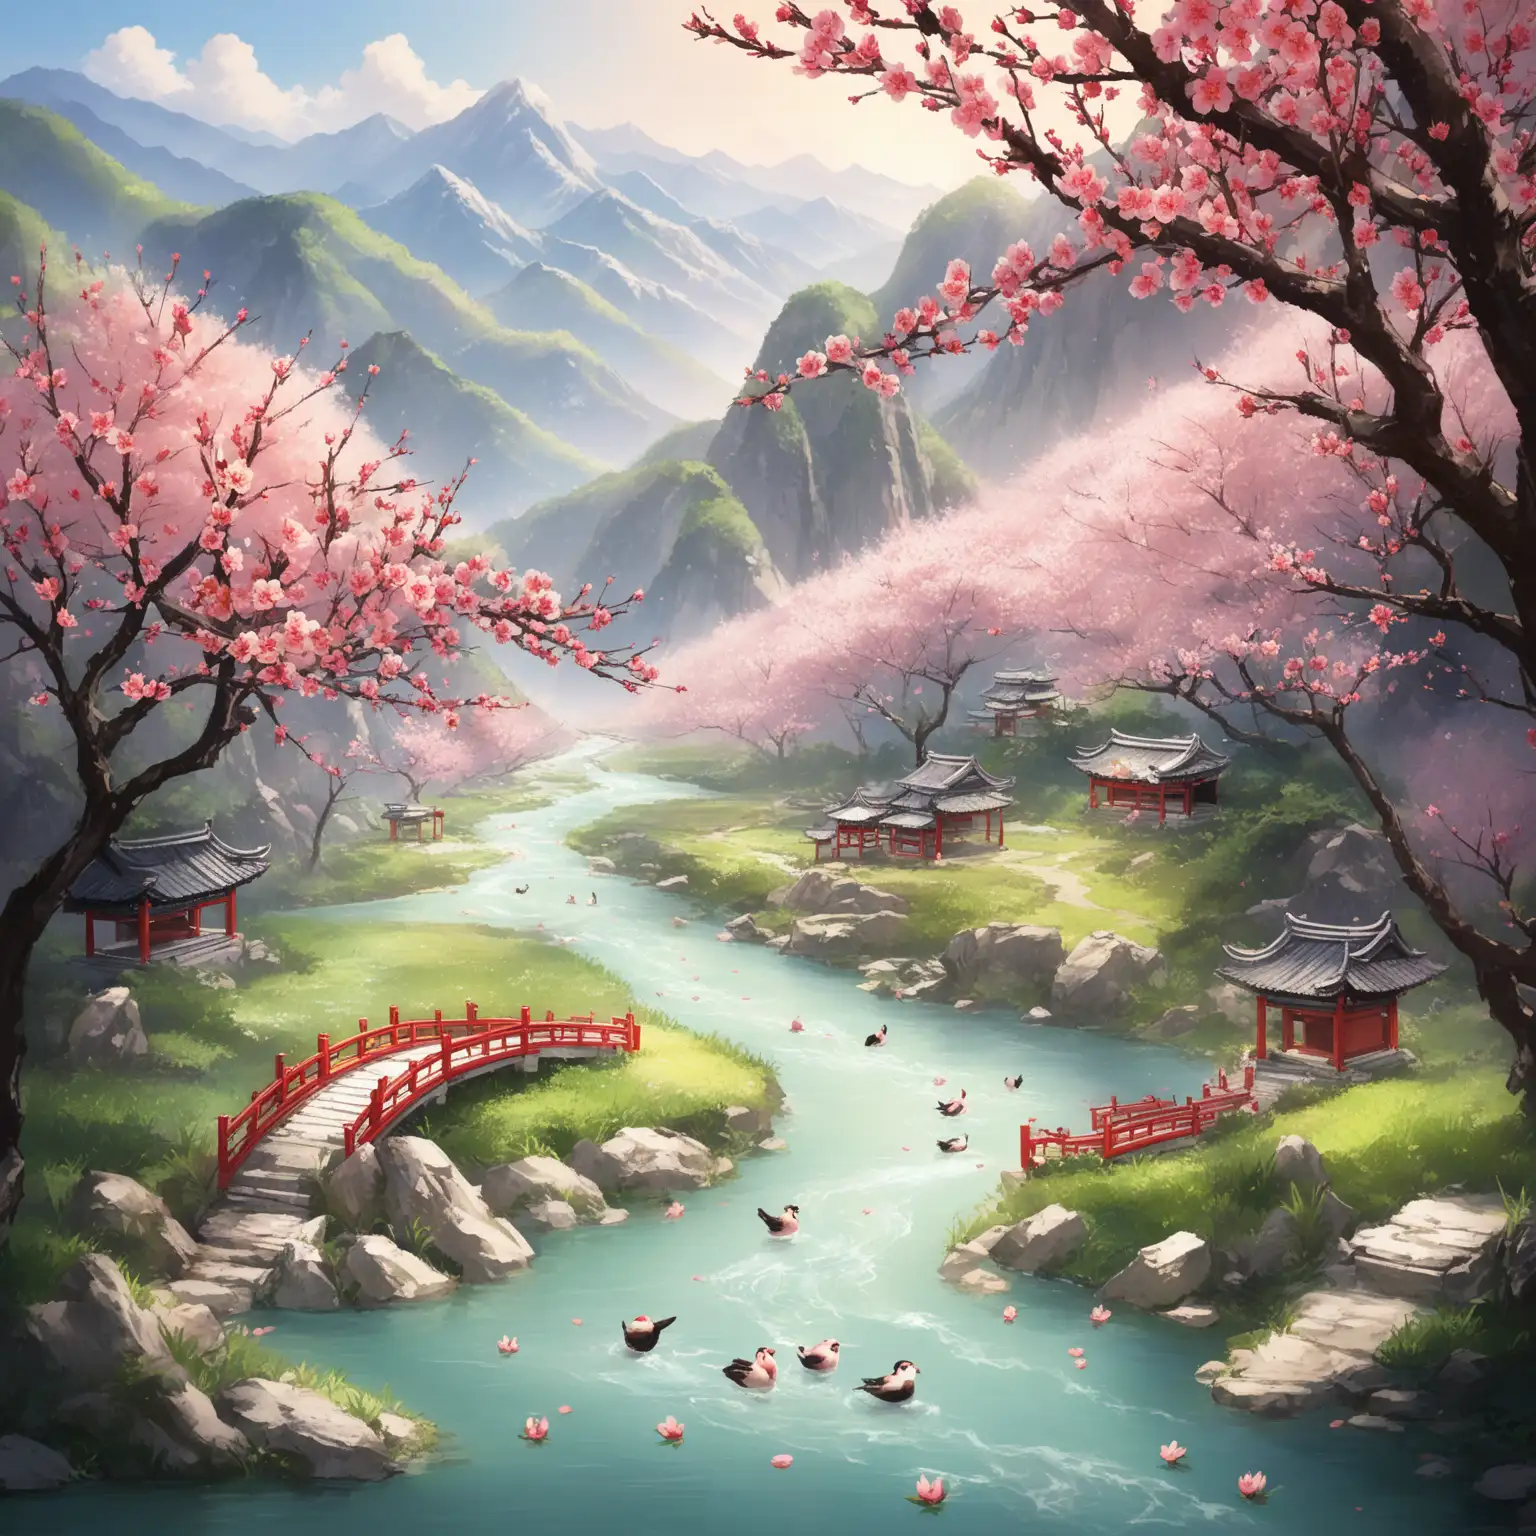 In the far East, hidden amongst mountains and winding rivers, there is a forgotten paradise called Peach Blossom Spring...